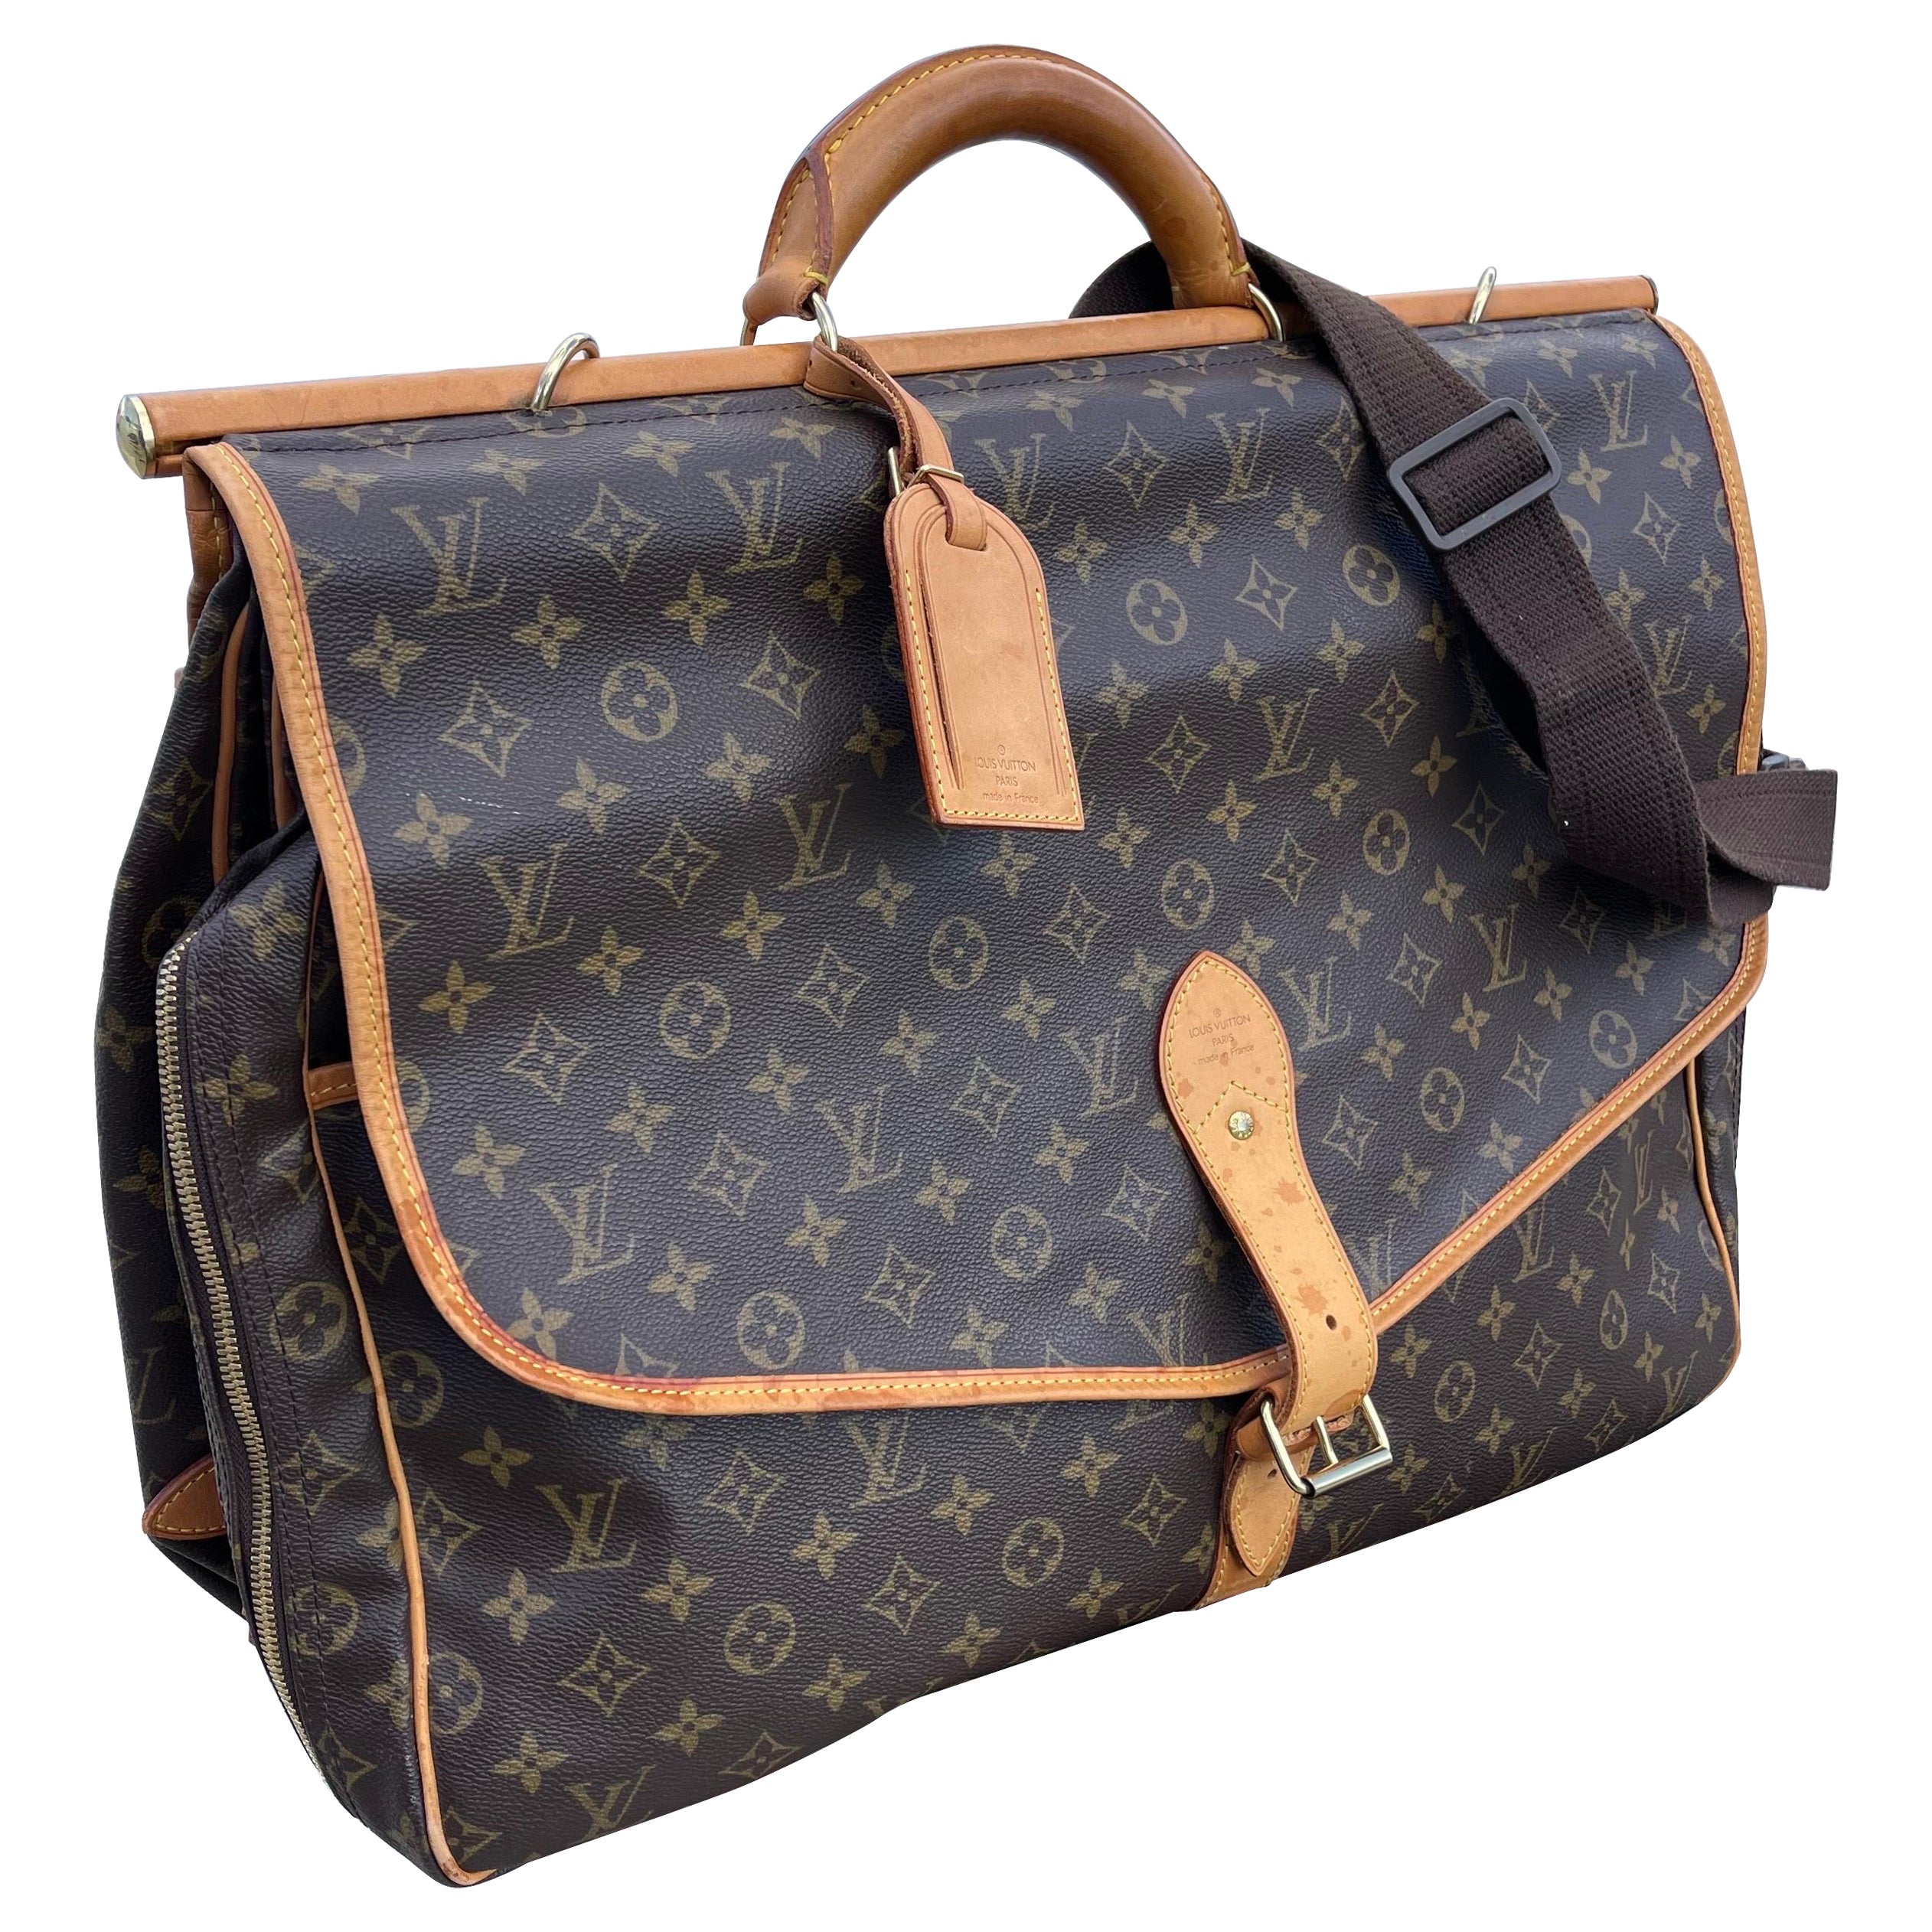 Louis Vuitton Sac Chasse Hunting Bag Monogram Canvas, Leather, 1999